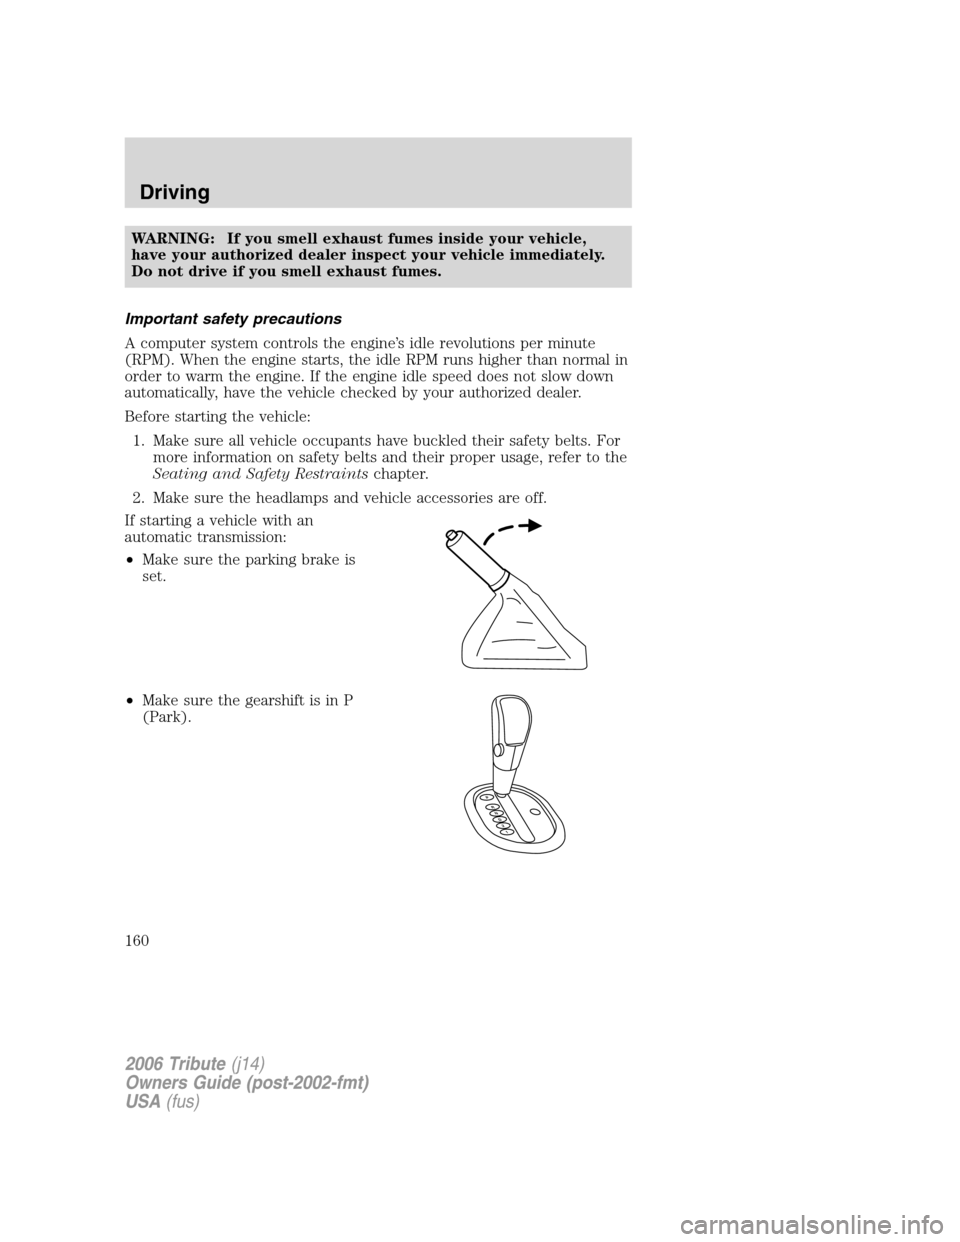 MAZDA MODEL TRIBUTE 2006  Owners Manual (in English) WARNING: If you smell exhaust fumes inside your vehicle,
have your authorized dealer inspect your vehicle immediately.
Do not drive if you smell exhaust fumes.
Important safety precautions
A computer 